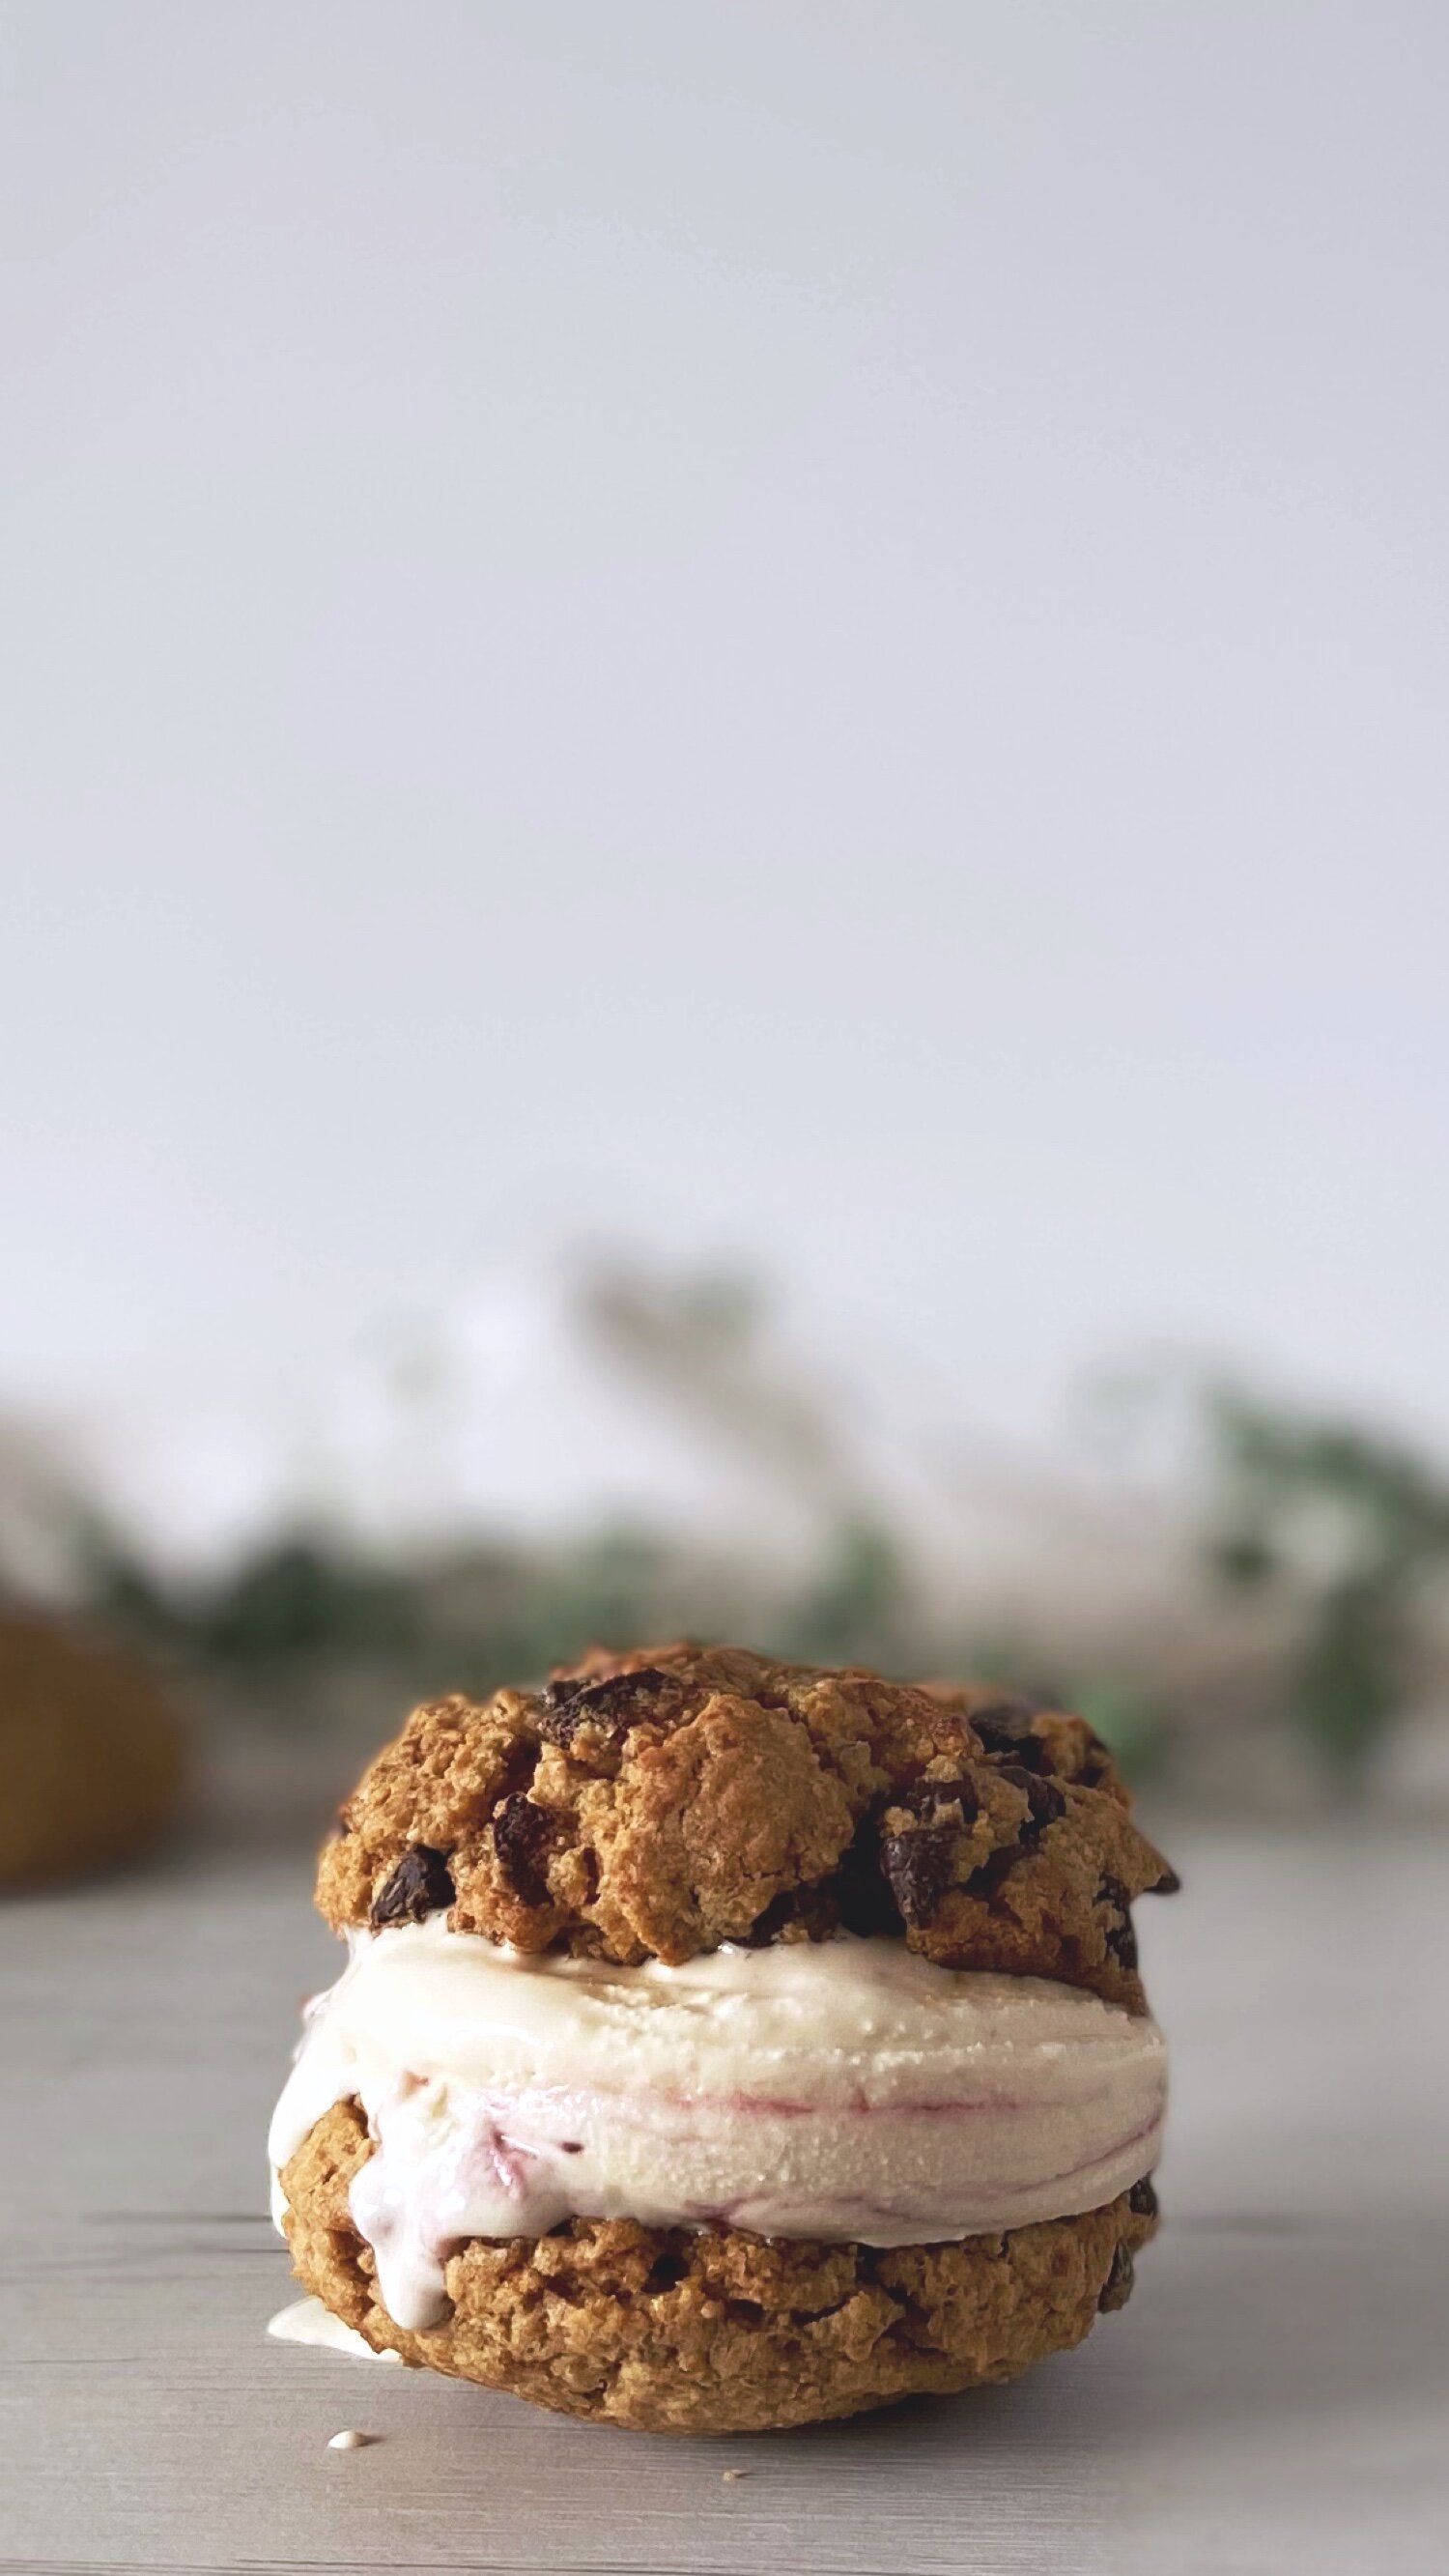 Vegan Apricot Chocolate Chip Oatmeal Cookies and Ice Cream Sandwiches by Brownble